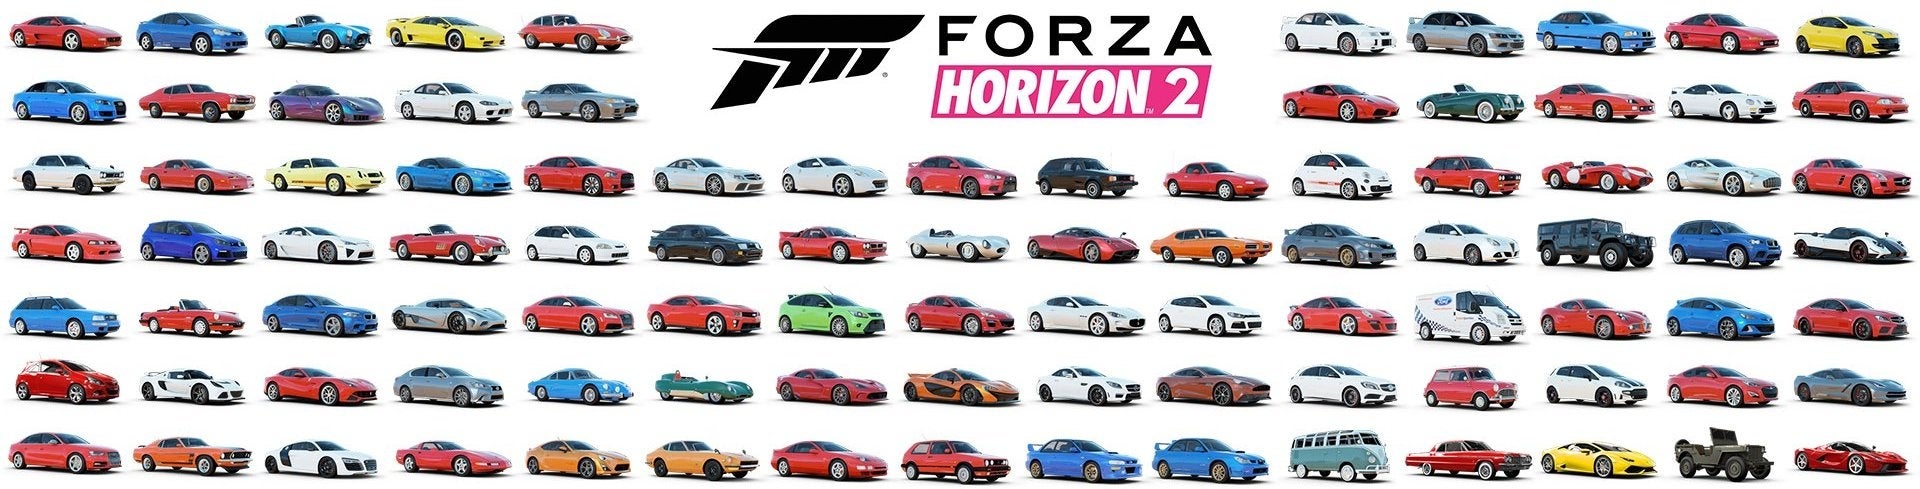 Image for Forza Horizon 2 proves the driving genre is back at its best